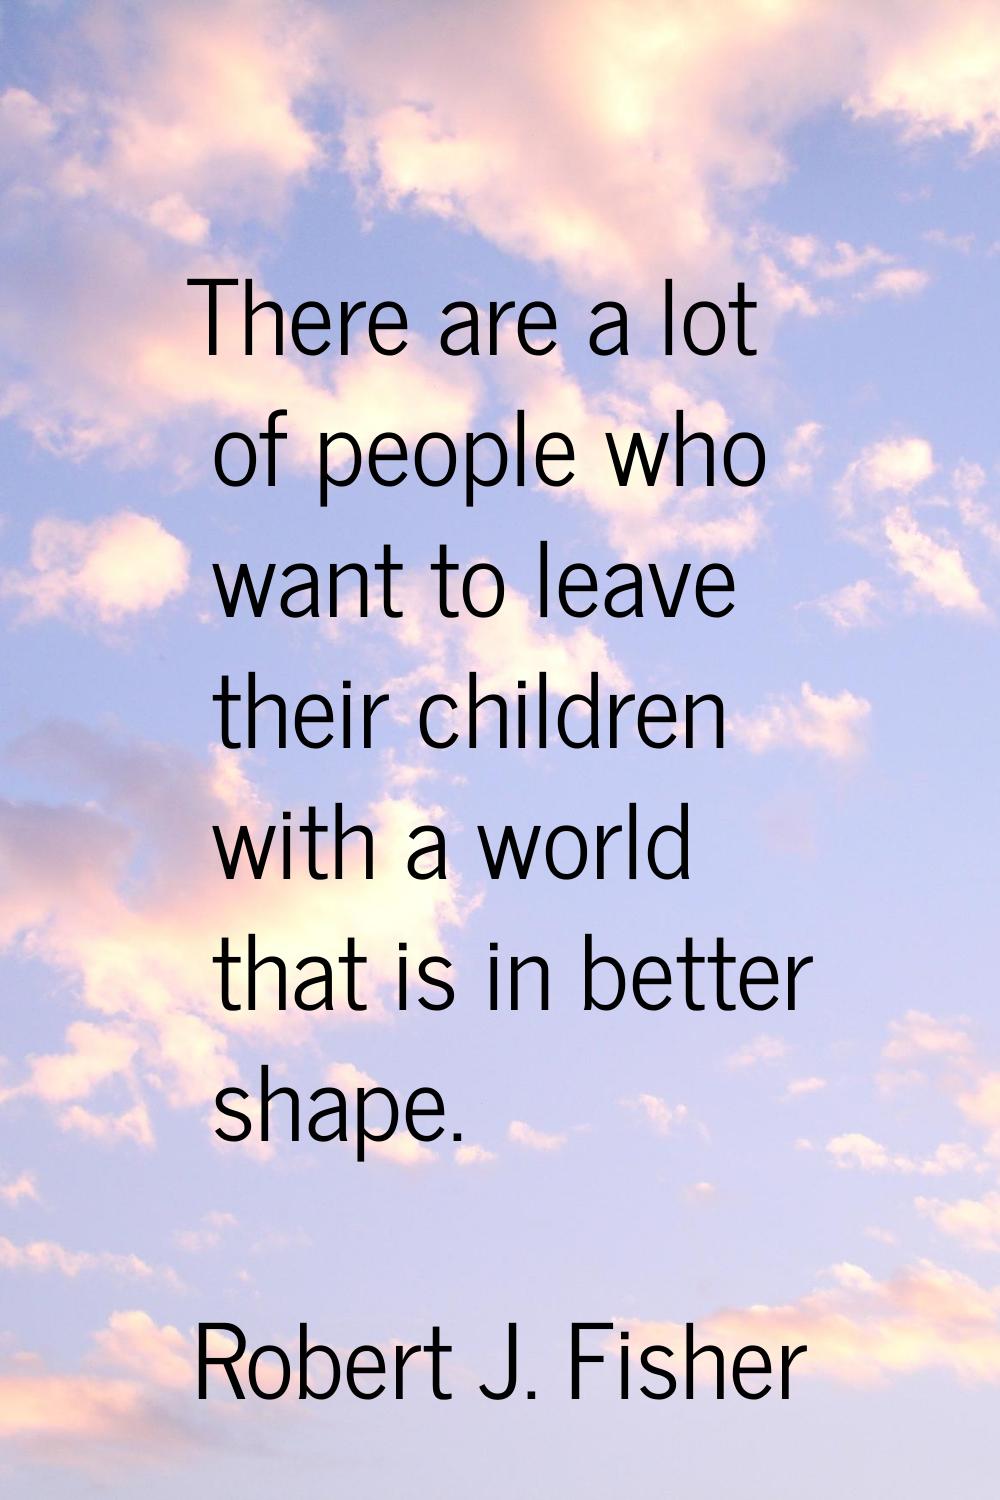 There are a lot of people who want to leave their children with a world that is in better shape.